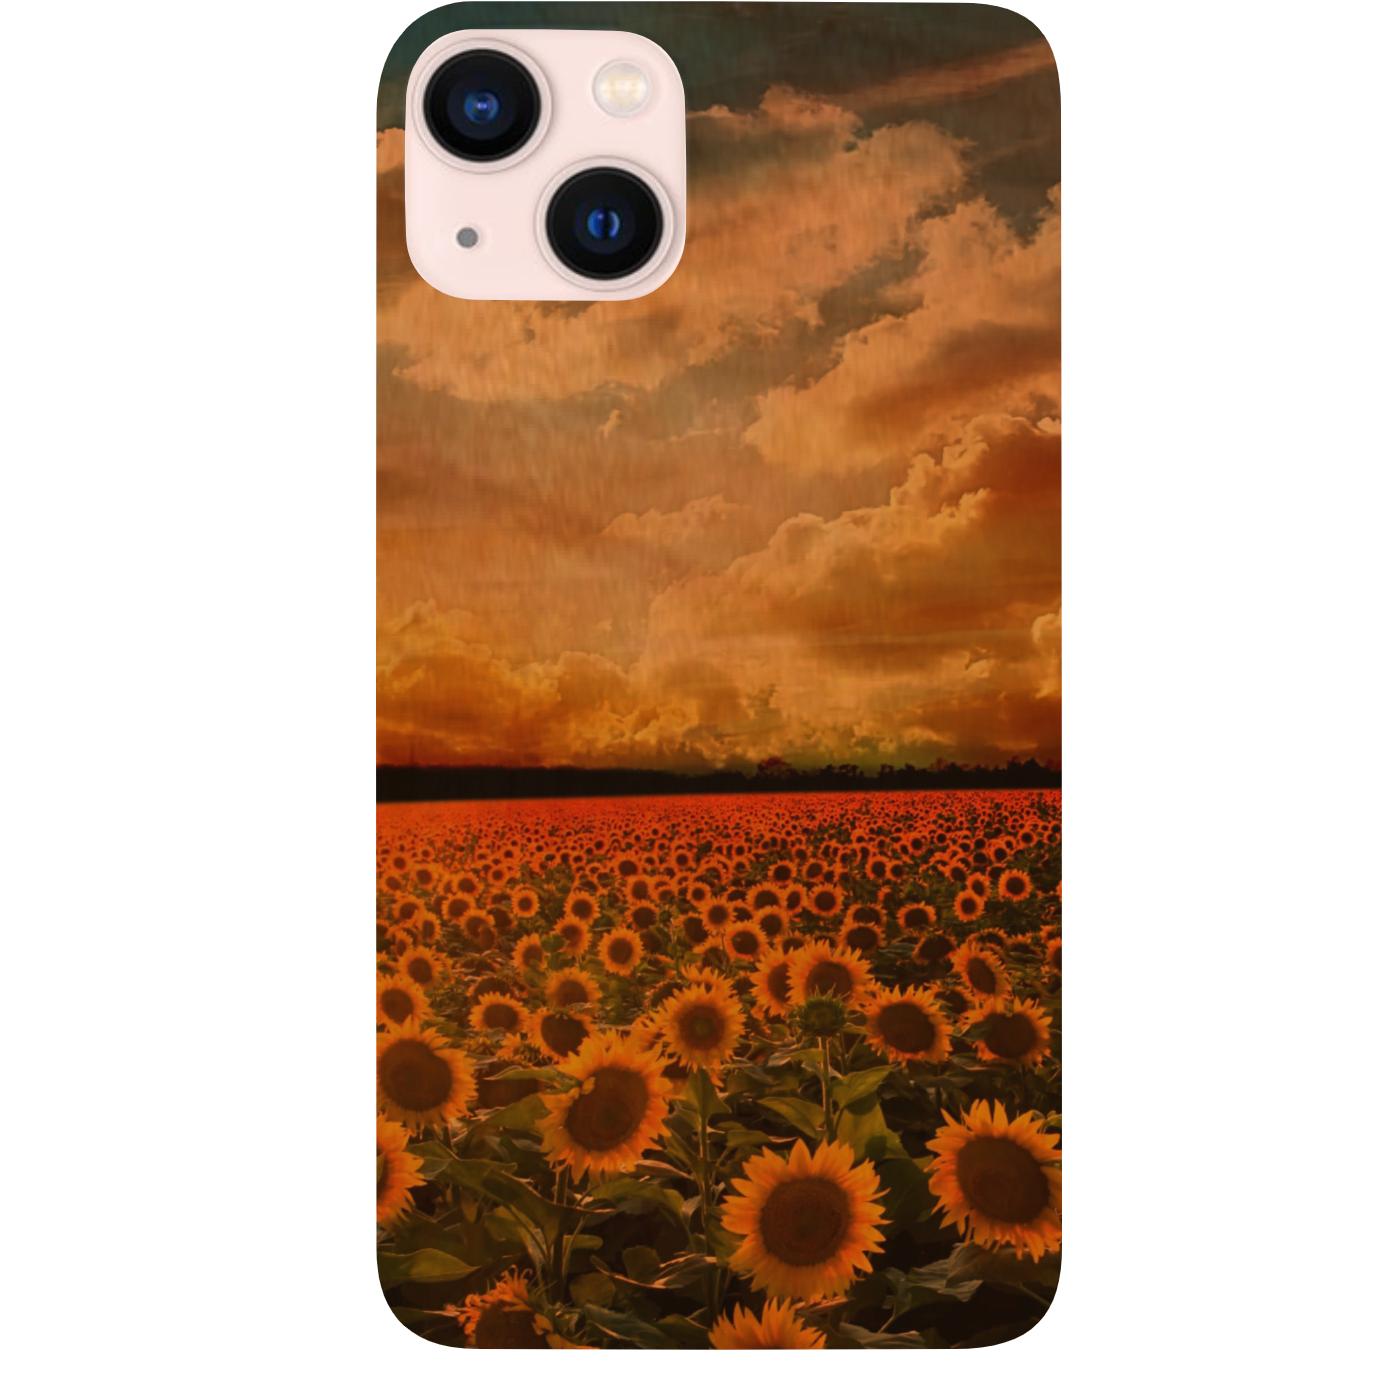 Sunflowers 2 - UV Color Printed Phone Case